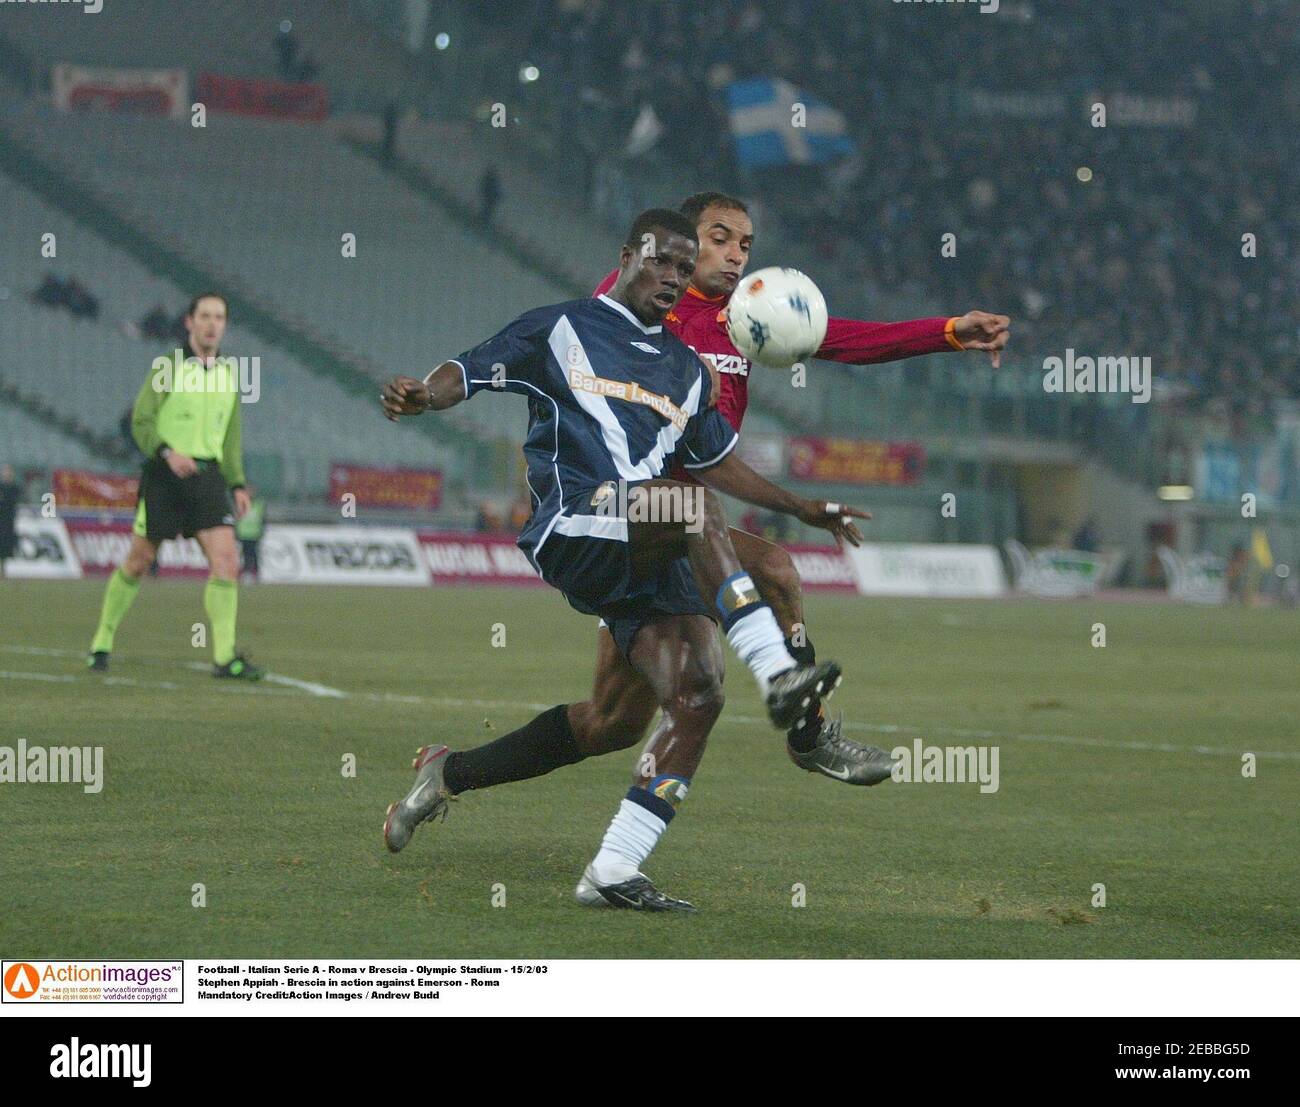 Football - Italian Serie A - Roma v Brescia - Olympic Stadium - 15/2/03  Stephen Appiah - Brescia in action against Emerson - Roma  Mandatory Credit:Action Images / Andrew Budd Stock Photo